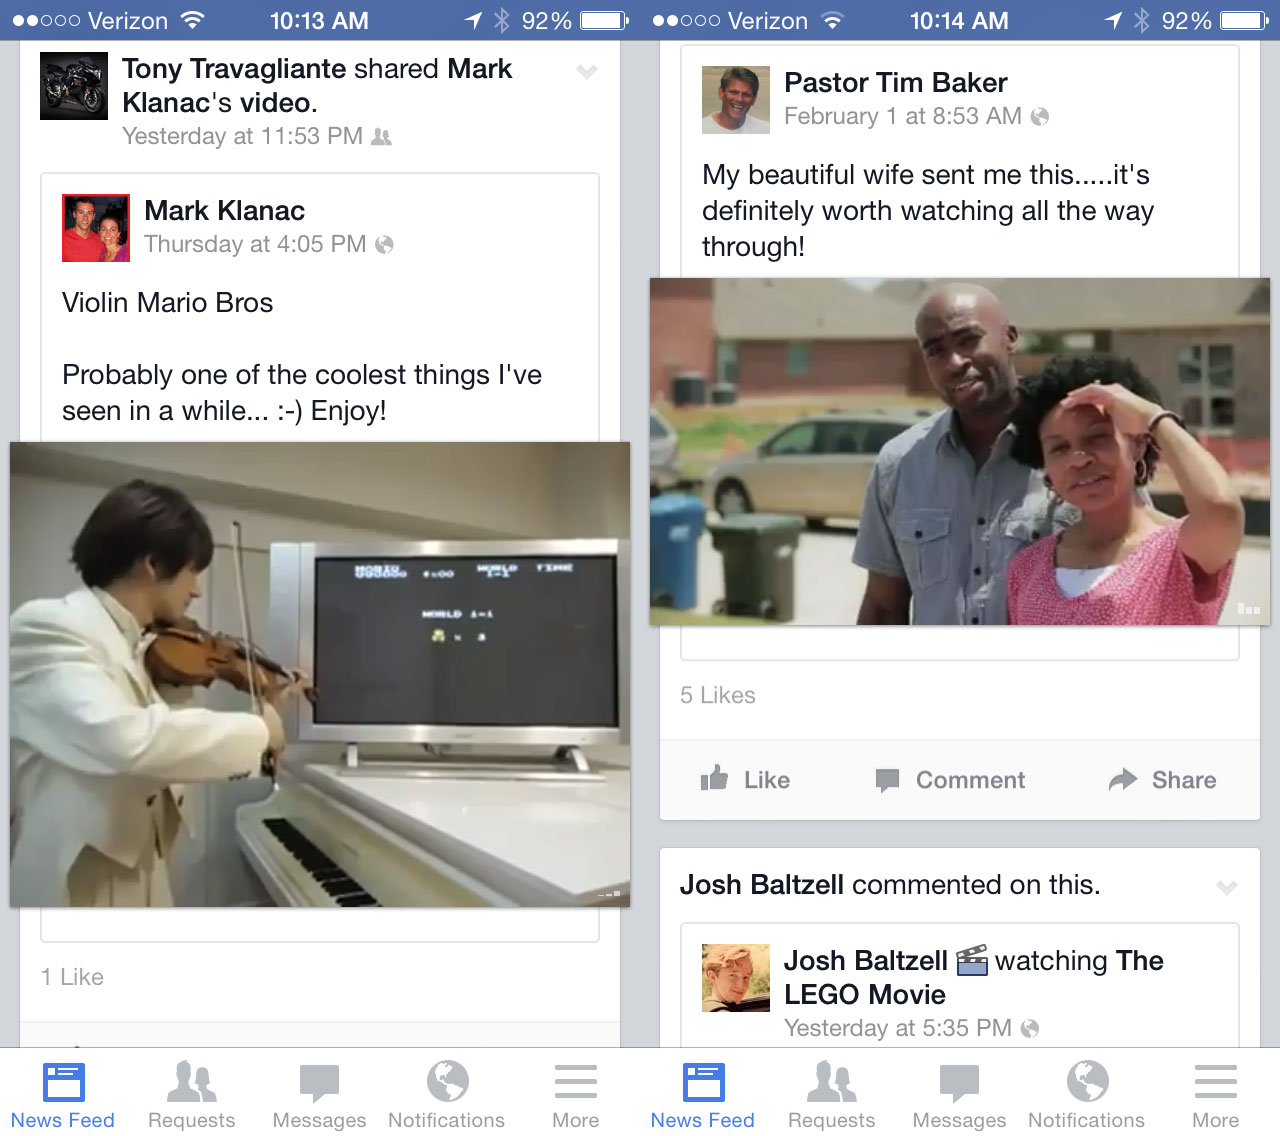 Users complain about Facebook auto play videos showing them videos they don't want to see and using costly data.